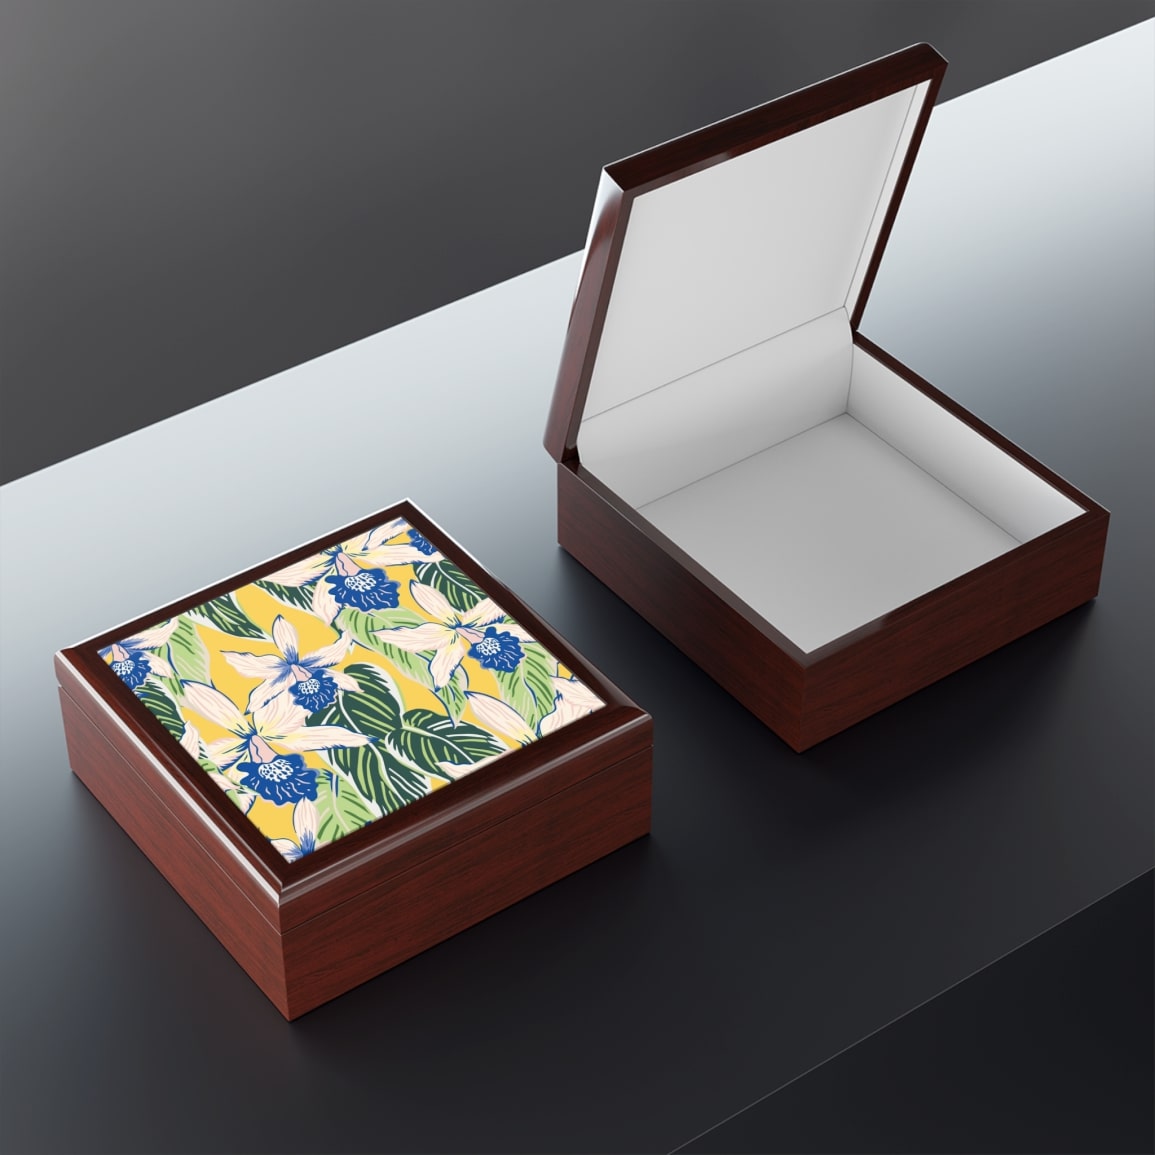 A mockup of a personalized jewelry box with abstract art on top.